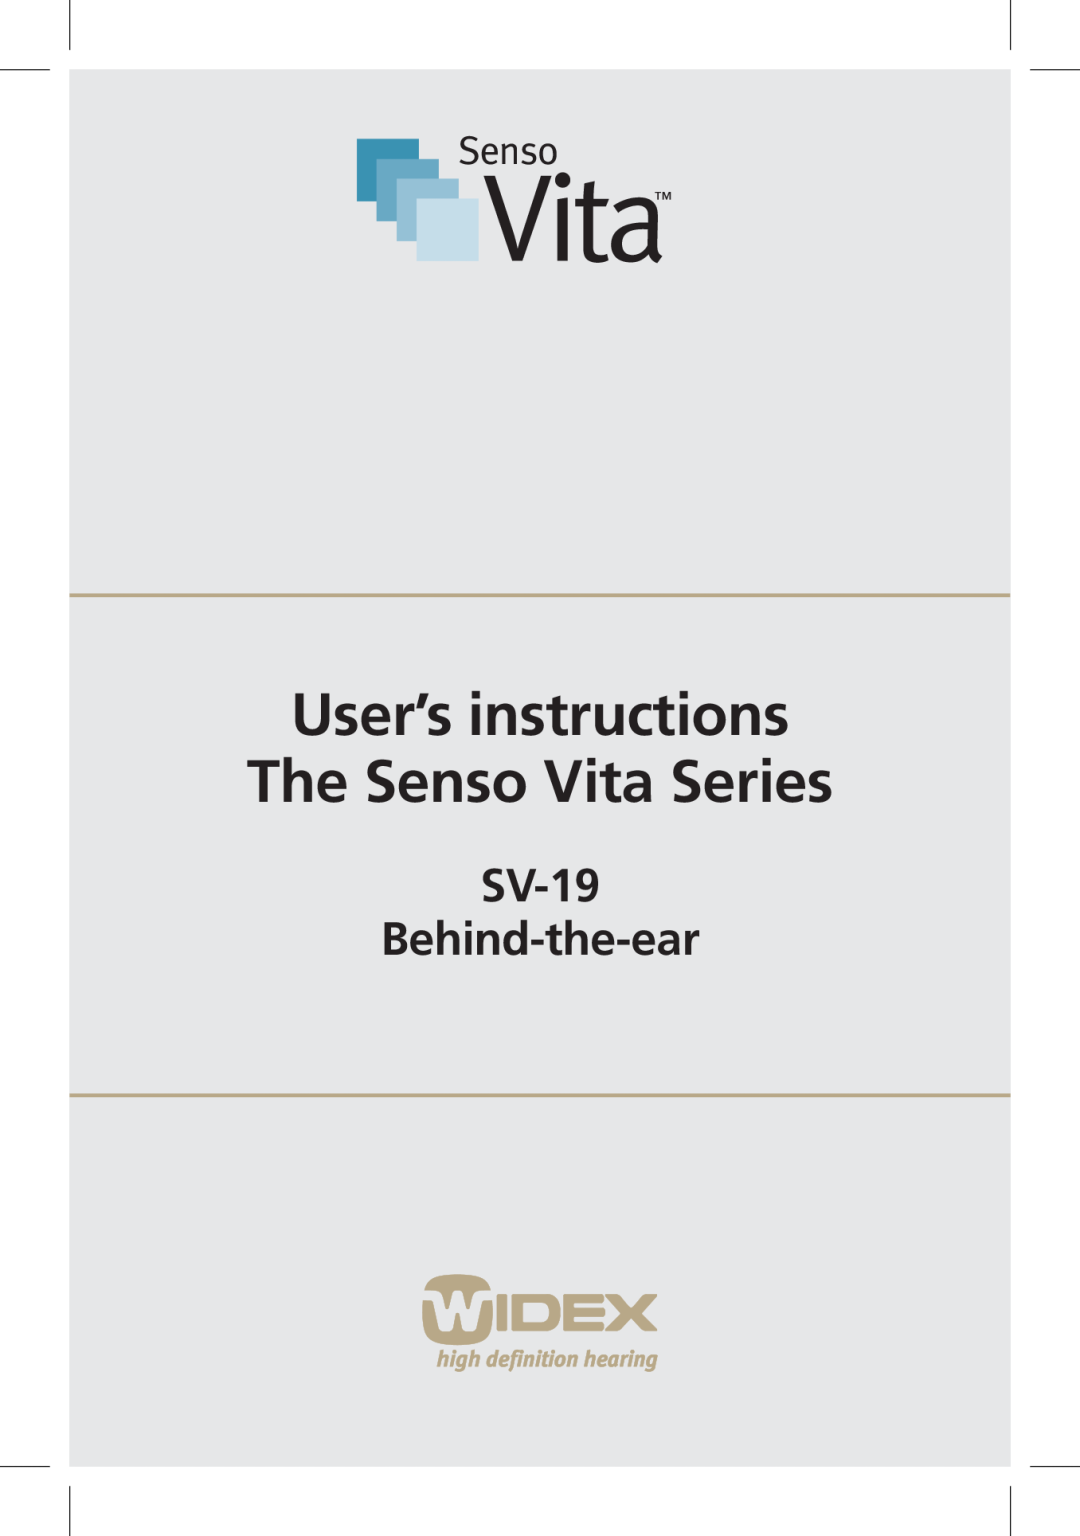 SV Sound manual SV-19 Behind-the-ear, User’s instructions The Senso Vita Series 